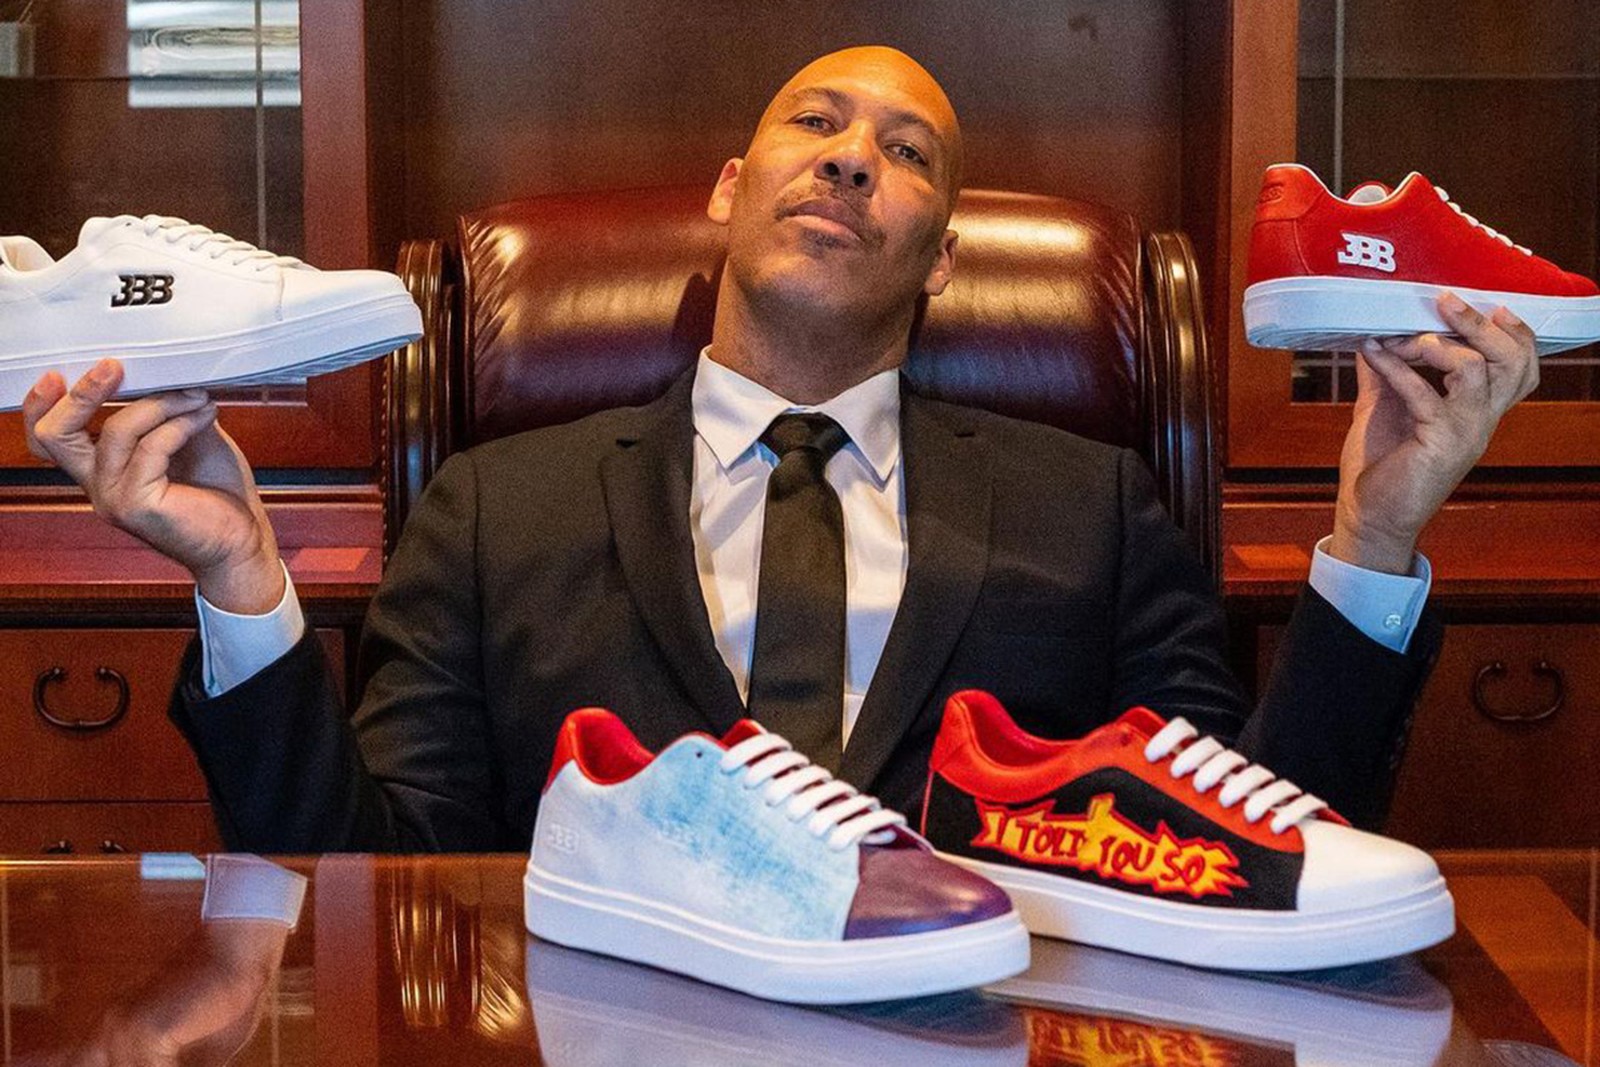 Twitter Reacts To Big Baller Brands New $695 "Luxury Lifestyle" Sneaker